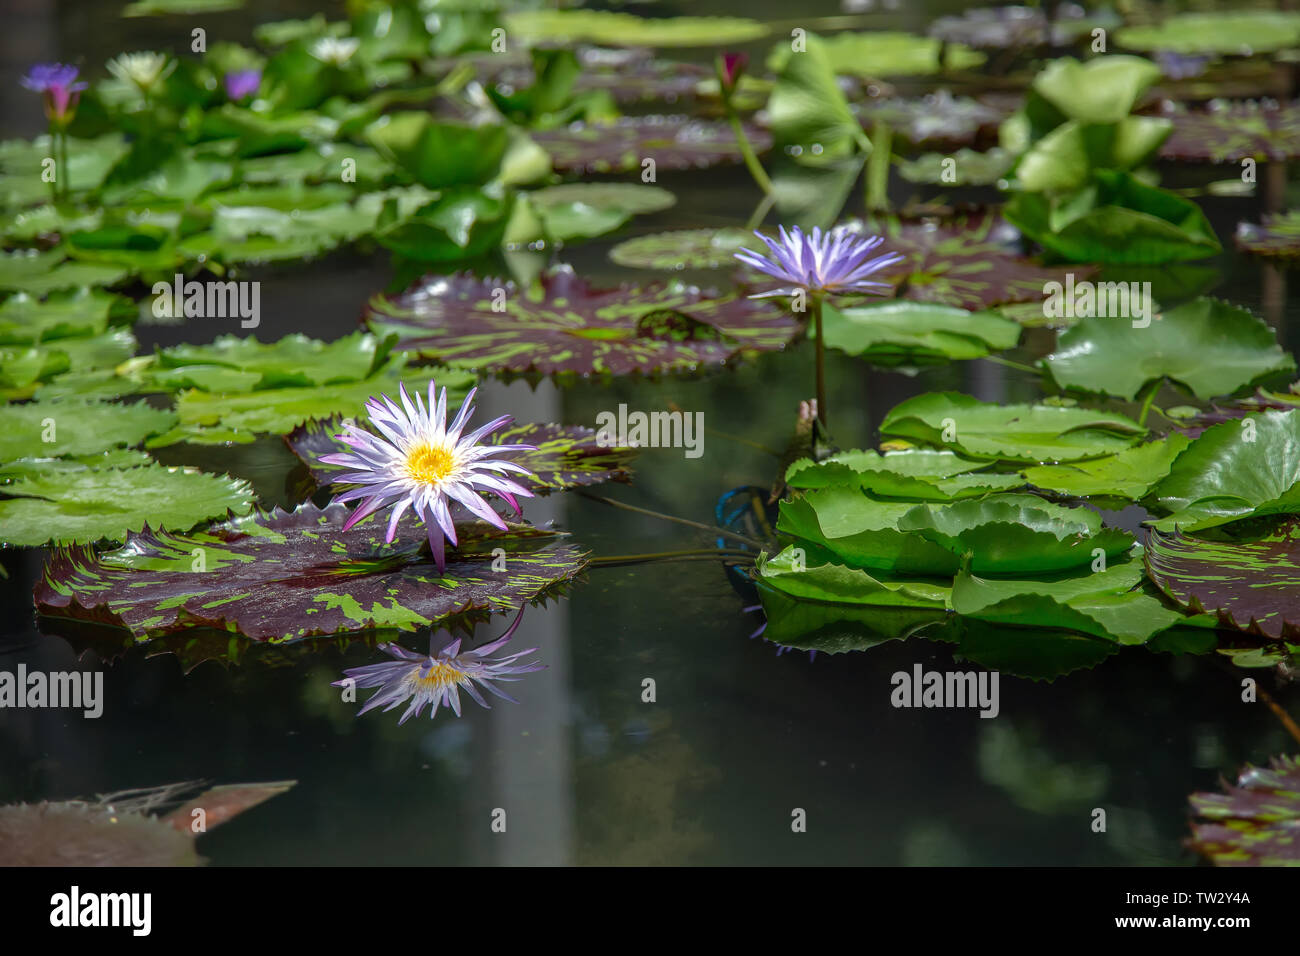 lotus flower and leaf on water pond background natural comcept Stock Photo